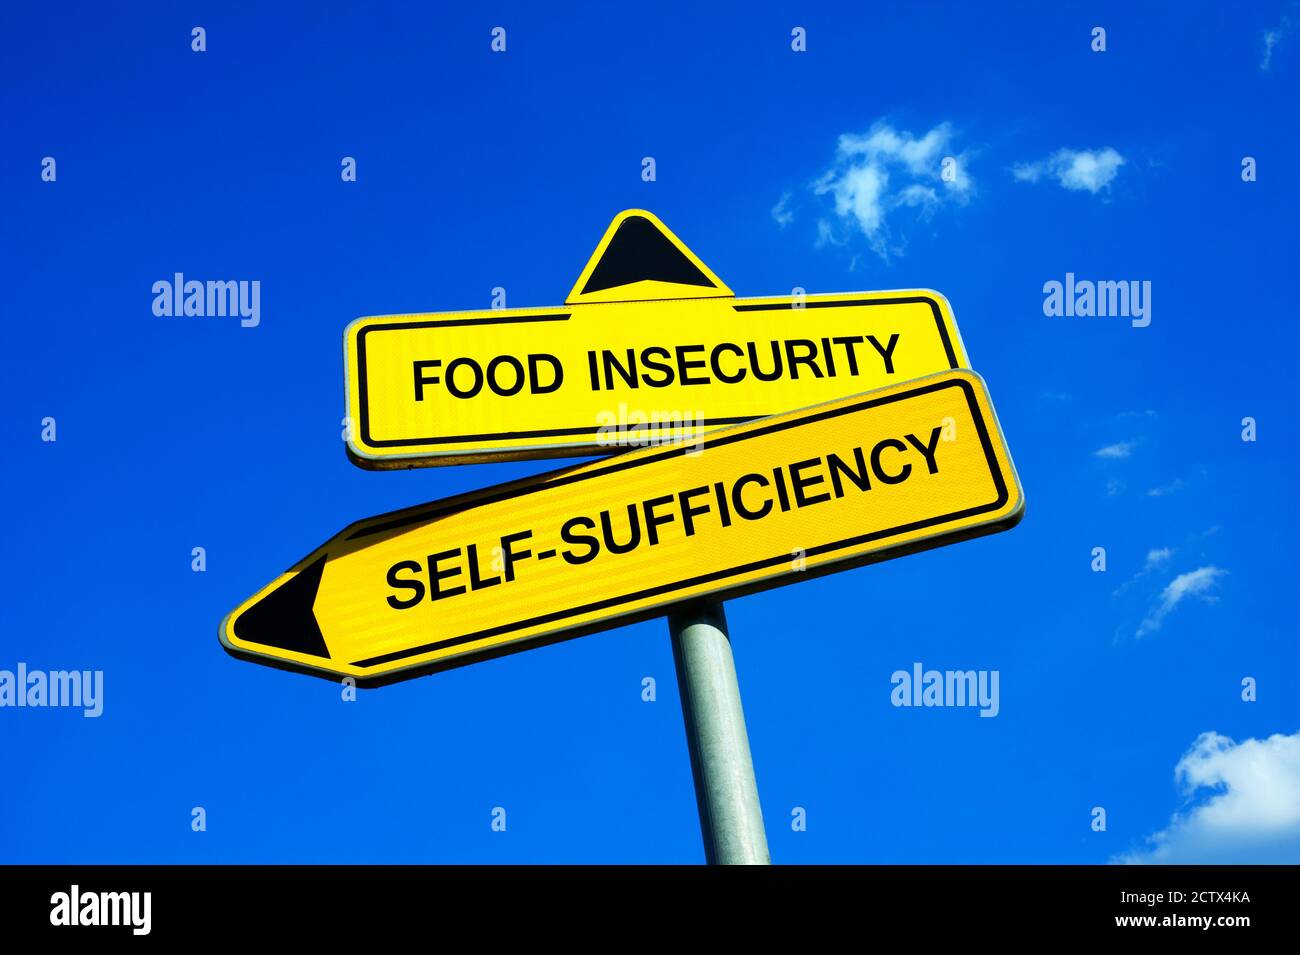 Food Insecurity or Self-Sufficiency - Traffic sign with two options - appeal to have self sufficient agriculture and cultivation of land. Prevention a Stock Photo